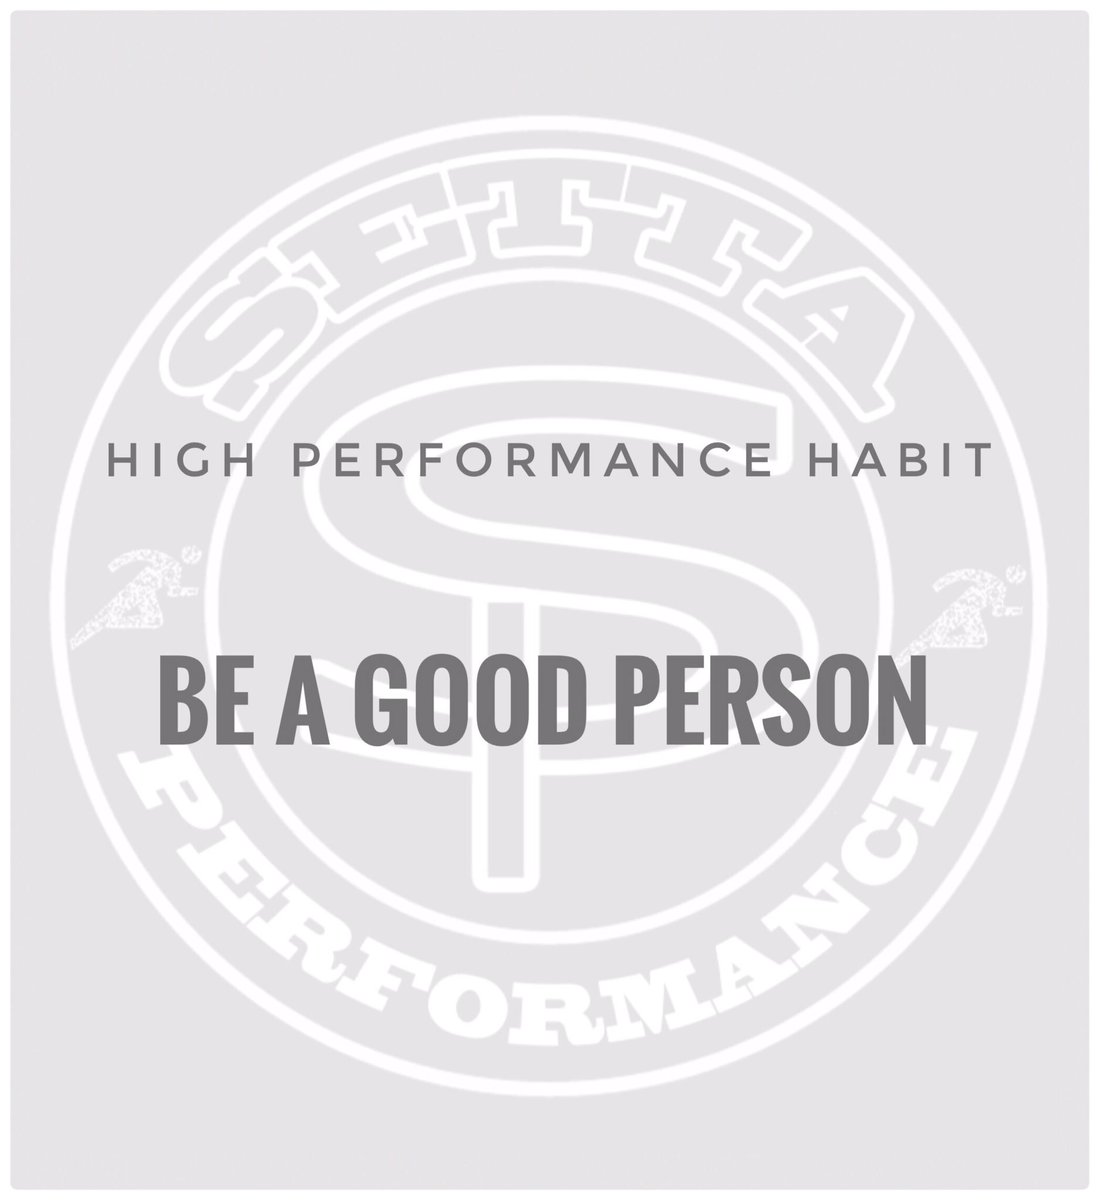 The best way to become Your best is simple... Be a Good Person ... the Highest Performance Habit you can have.  
.
.
.
#itsadailyhabit #choices #bestrong #beloving #befriendly #begood #dogood